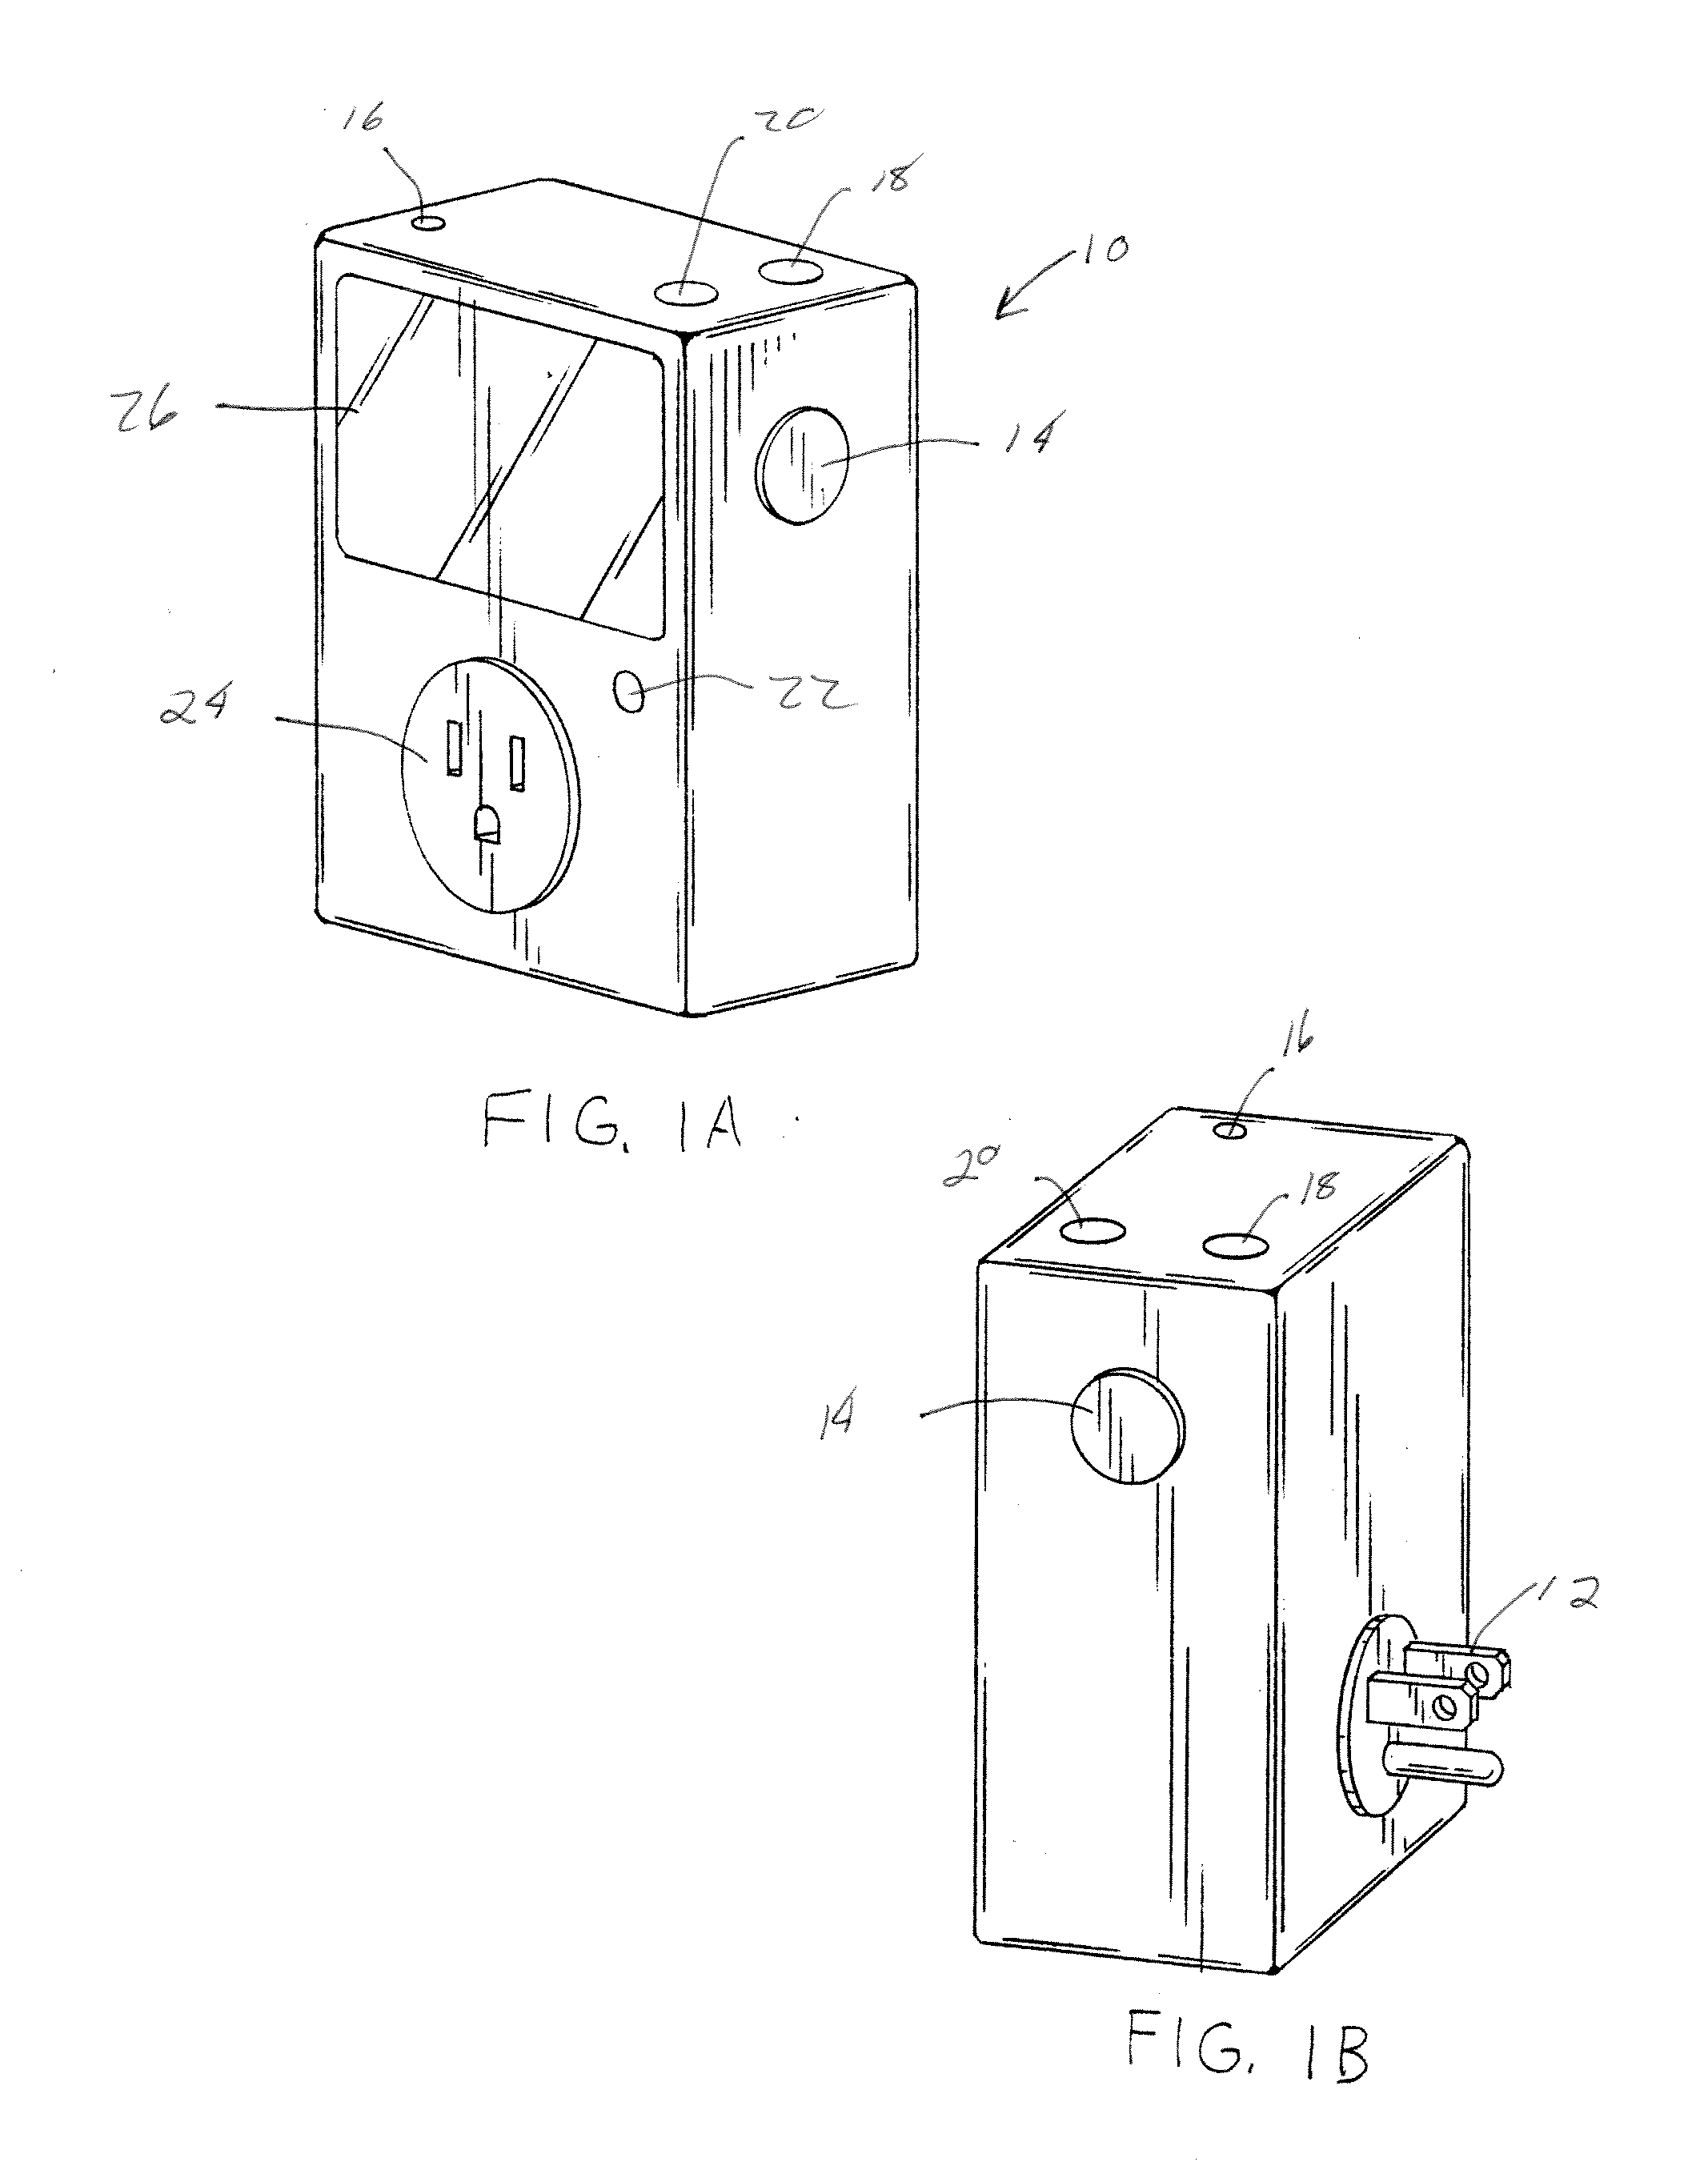 Resource monitoring device